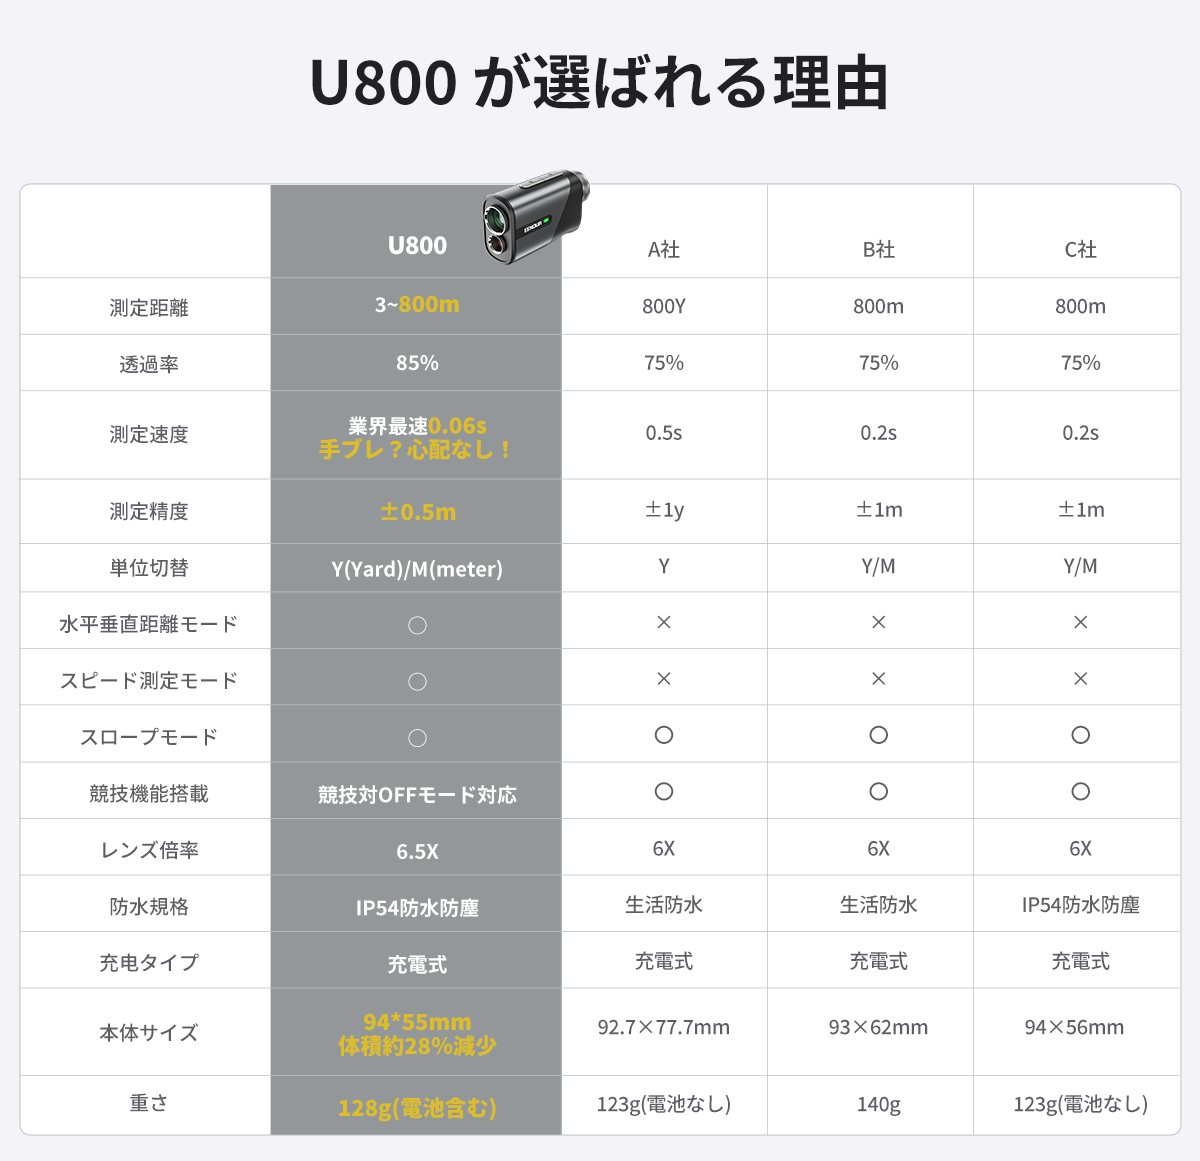 ||BB the lowest price sale last day!||[TV. introduction / Yahoo! Rakuten AM1 rank ] Golf range finder laser rangefinder Mini EENOUR U800 fastest 0.06 second pcs 6.5 times seeing at distance many layer coating Mother's Day 